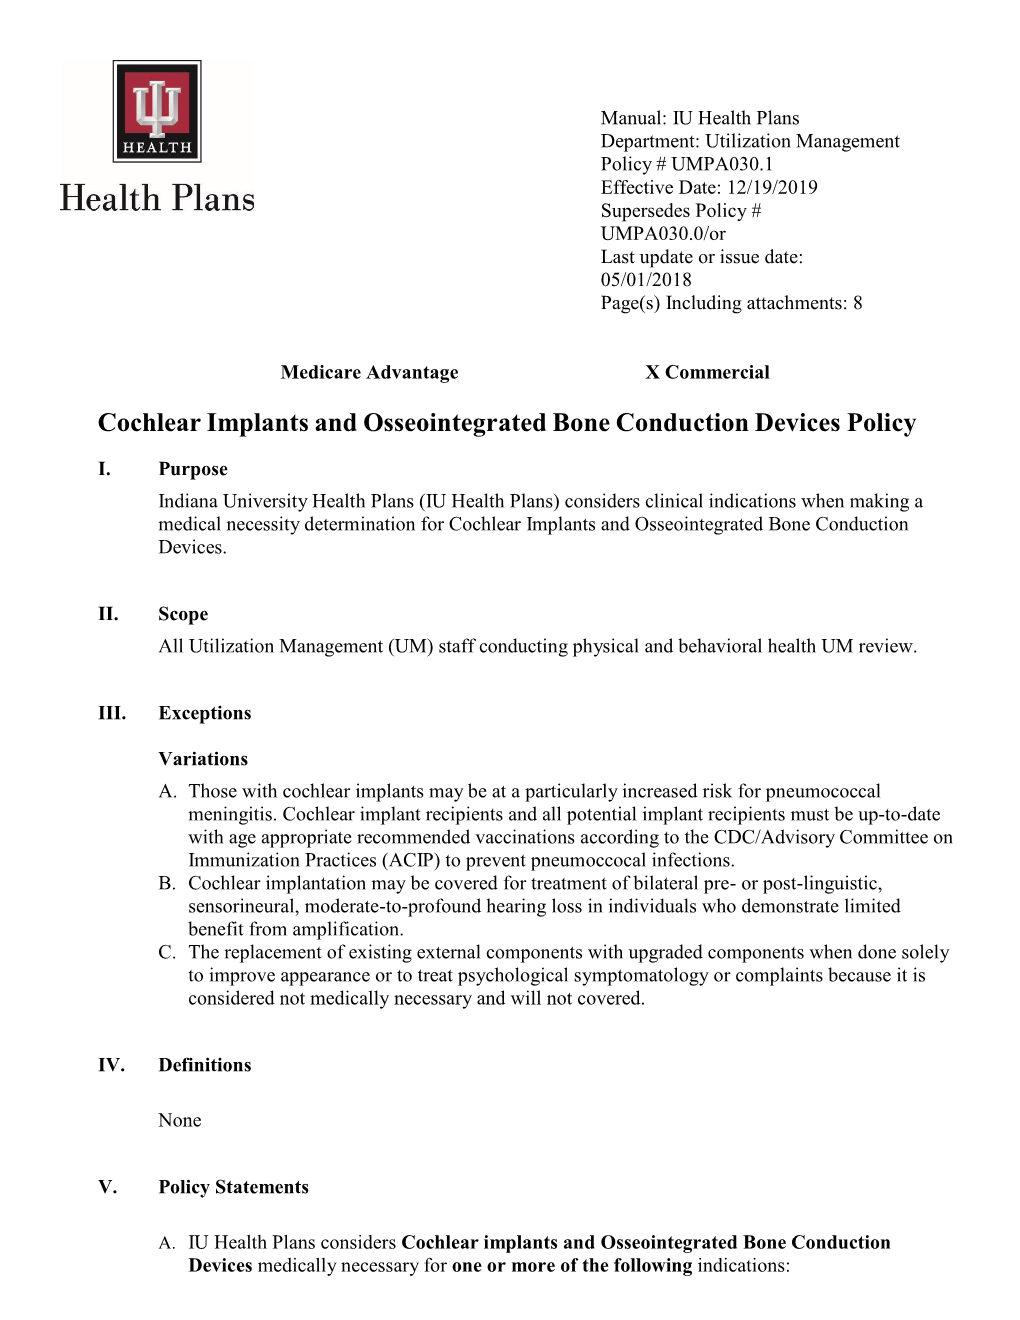 Cochlear Implants and Osseointegrated Bone Conduction Devices Policy